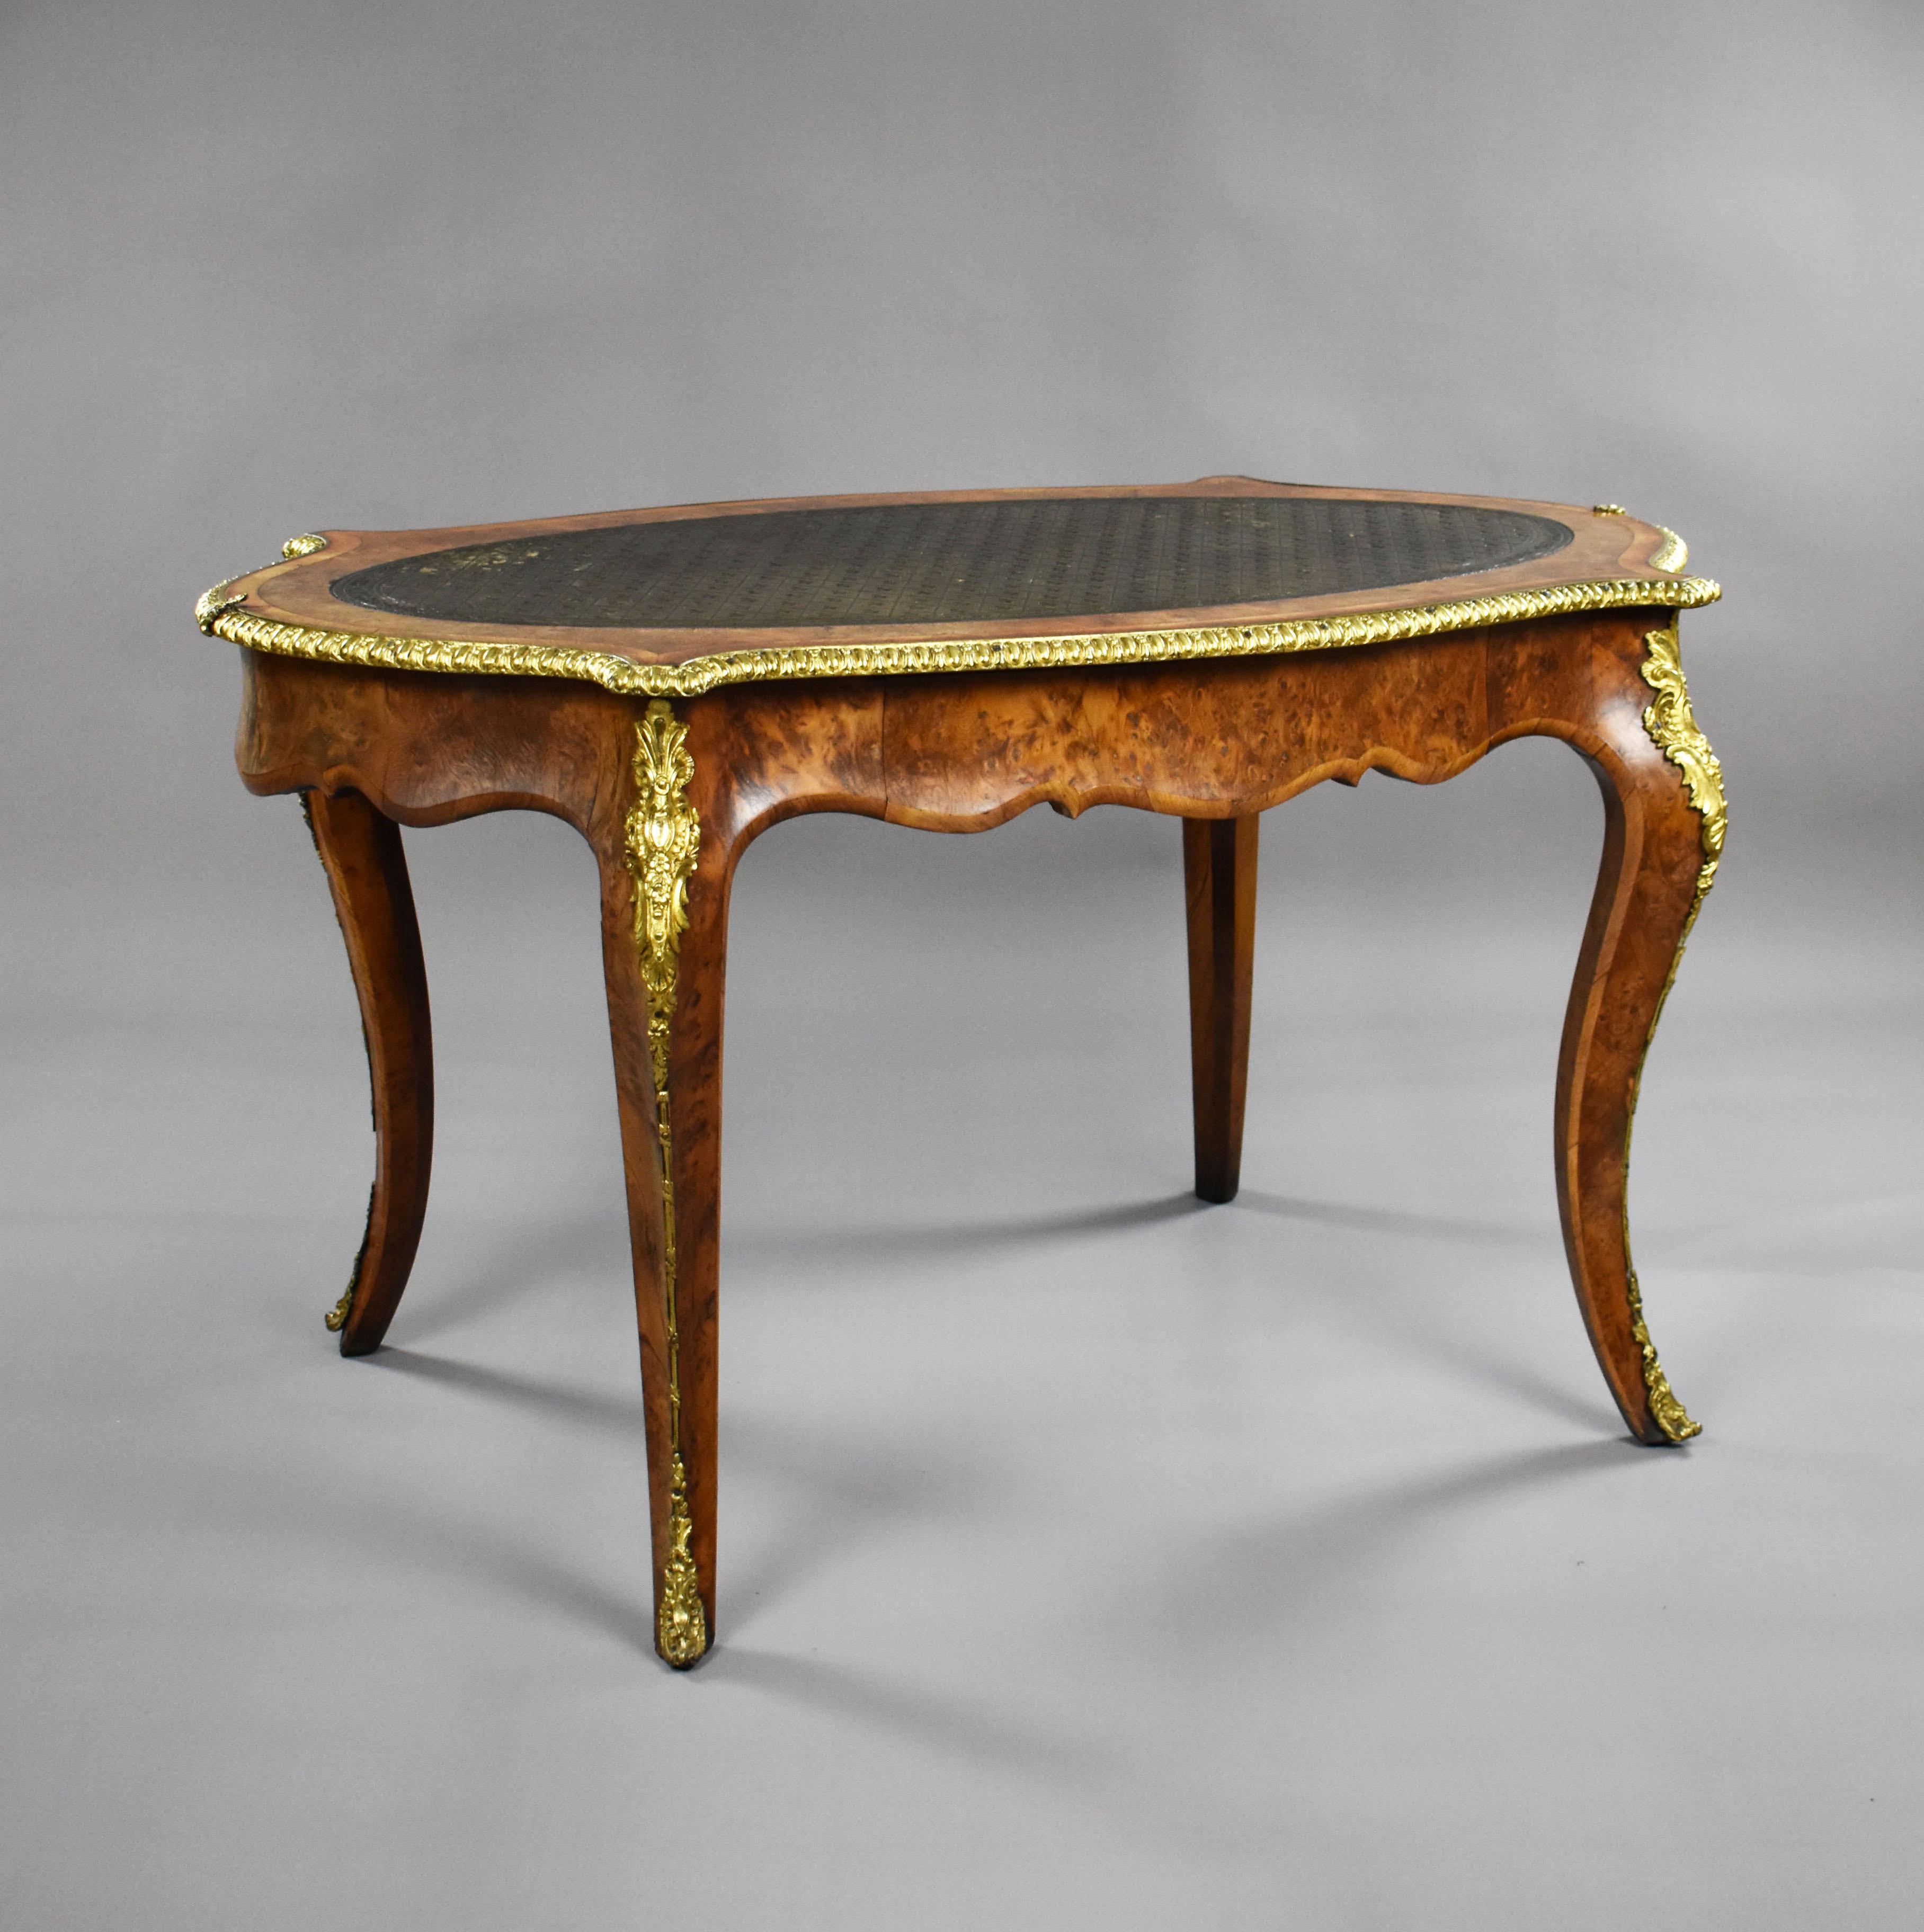 A good quality burr yew, tulipwood banded and gilt brass mounted bureau plat by Howard & Sons, remaining in good condition, showing very minor losses and wear commensurate with age and use. 

Measures: Width: 127cm depth: 72cm height: 71cm.